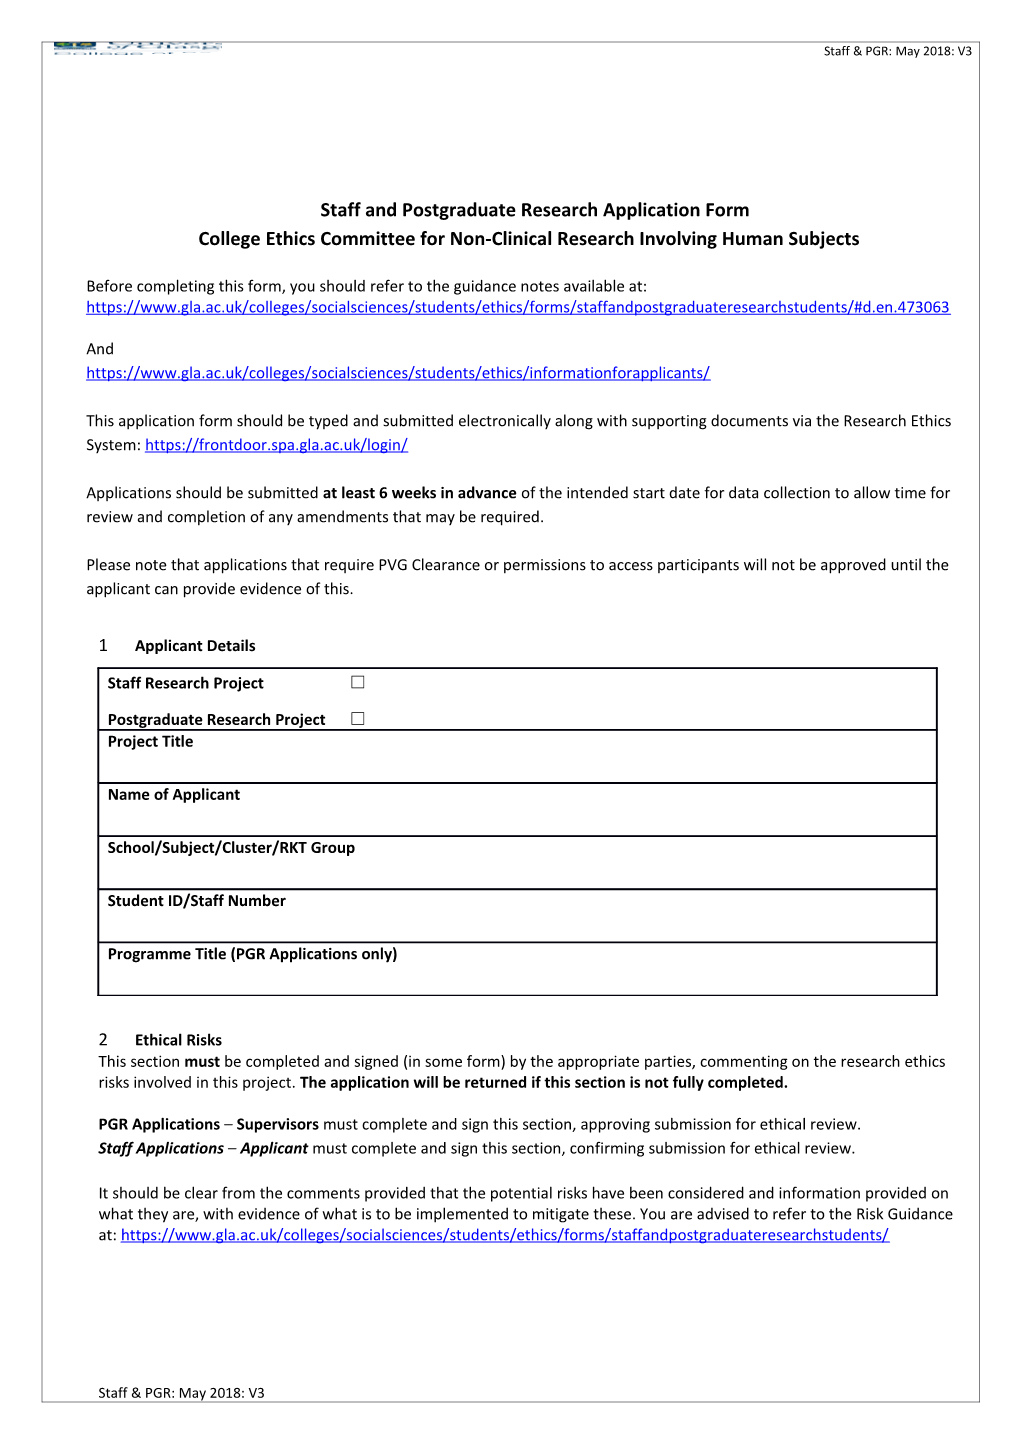 Staff and Postgraduate Research Application Form